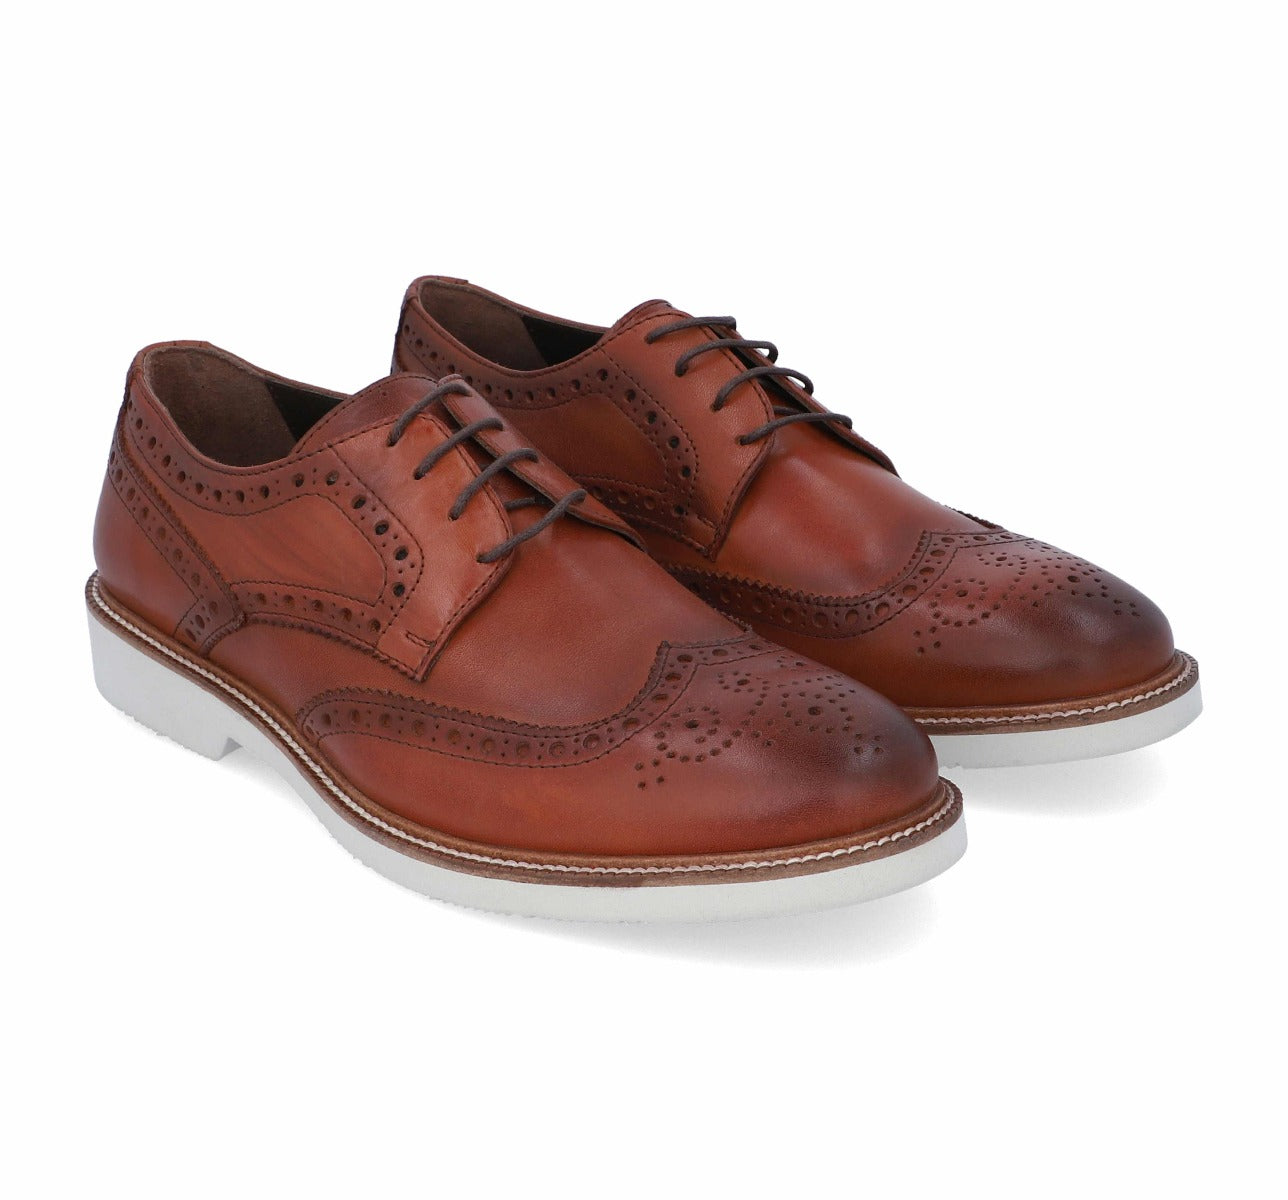 Barefoot Brown Formal Perforation with White Sole For Men 10788